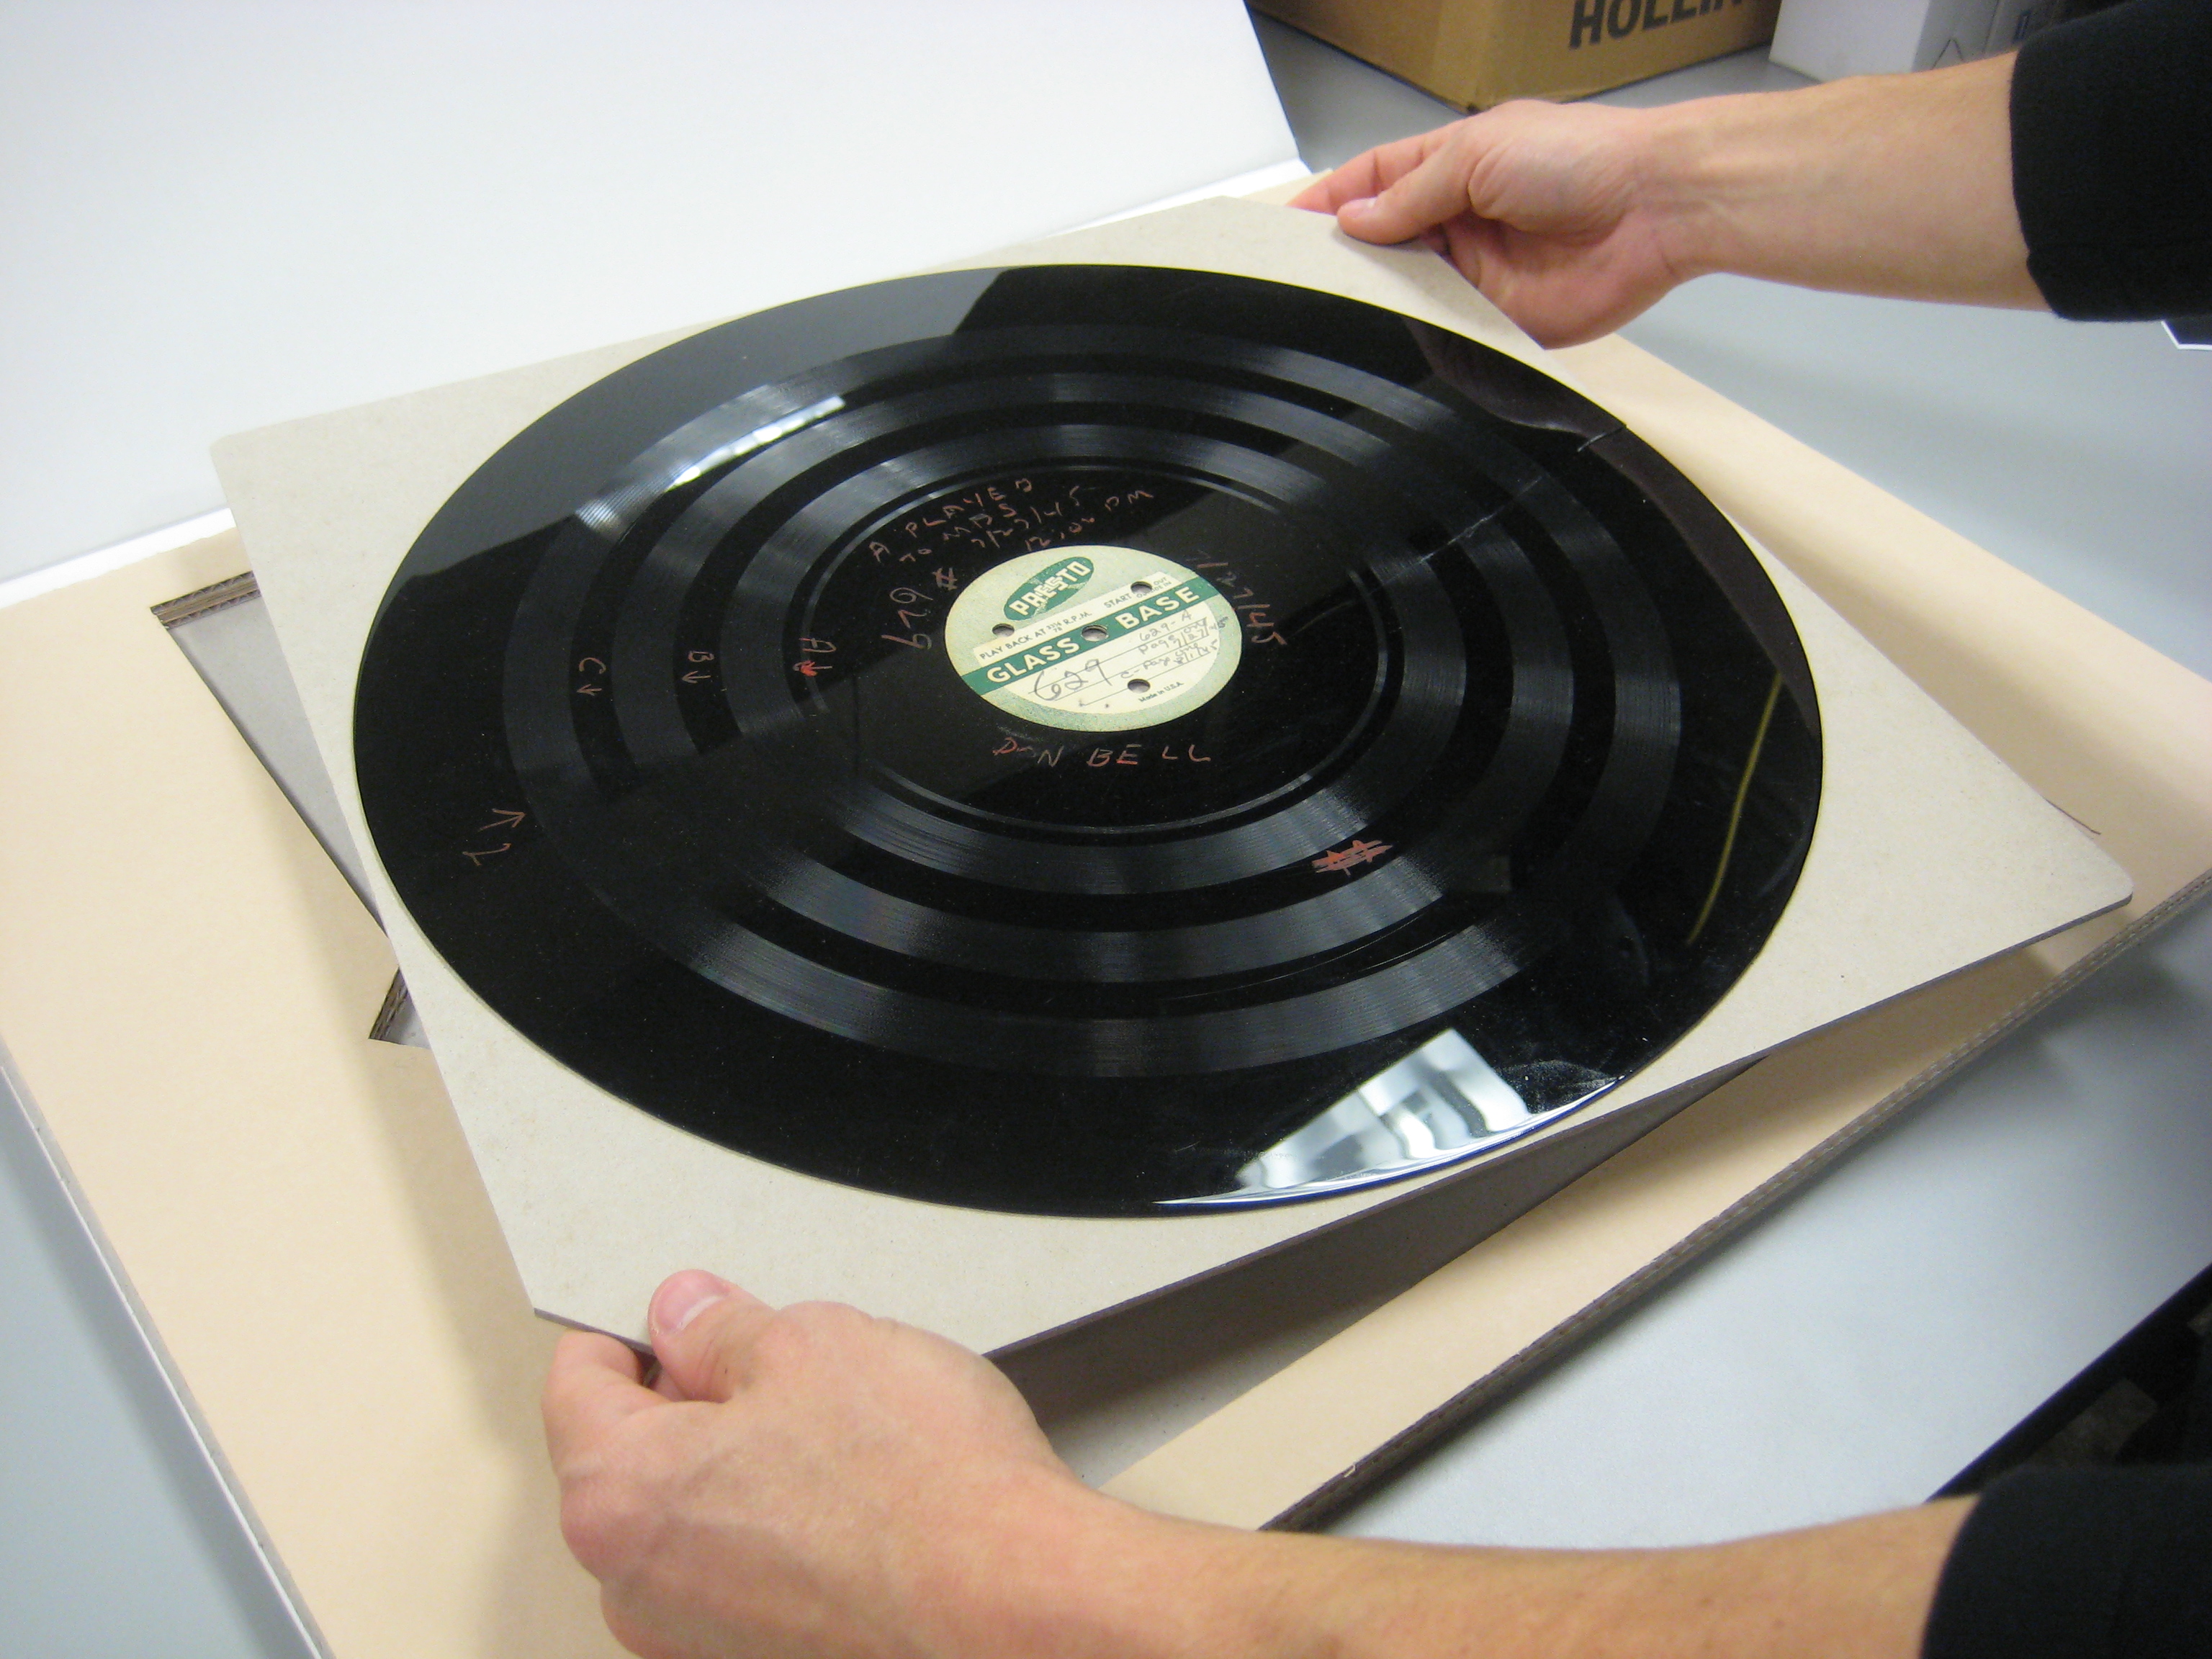 Designing a Housing for Horizontal Storage of Cracked or Broken Phonograph Discs